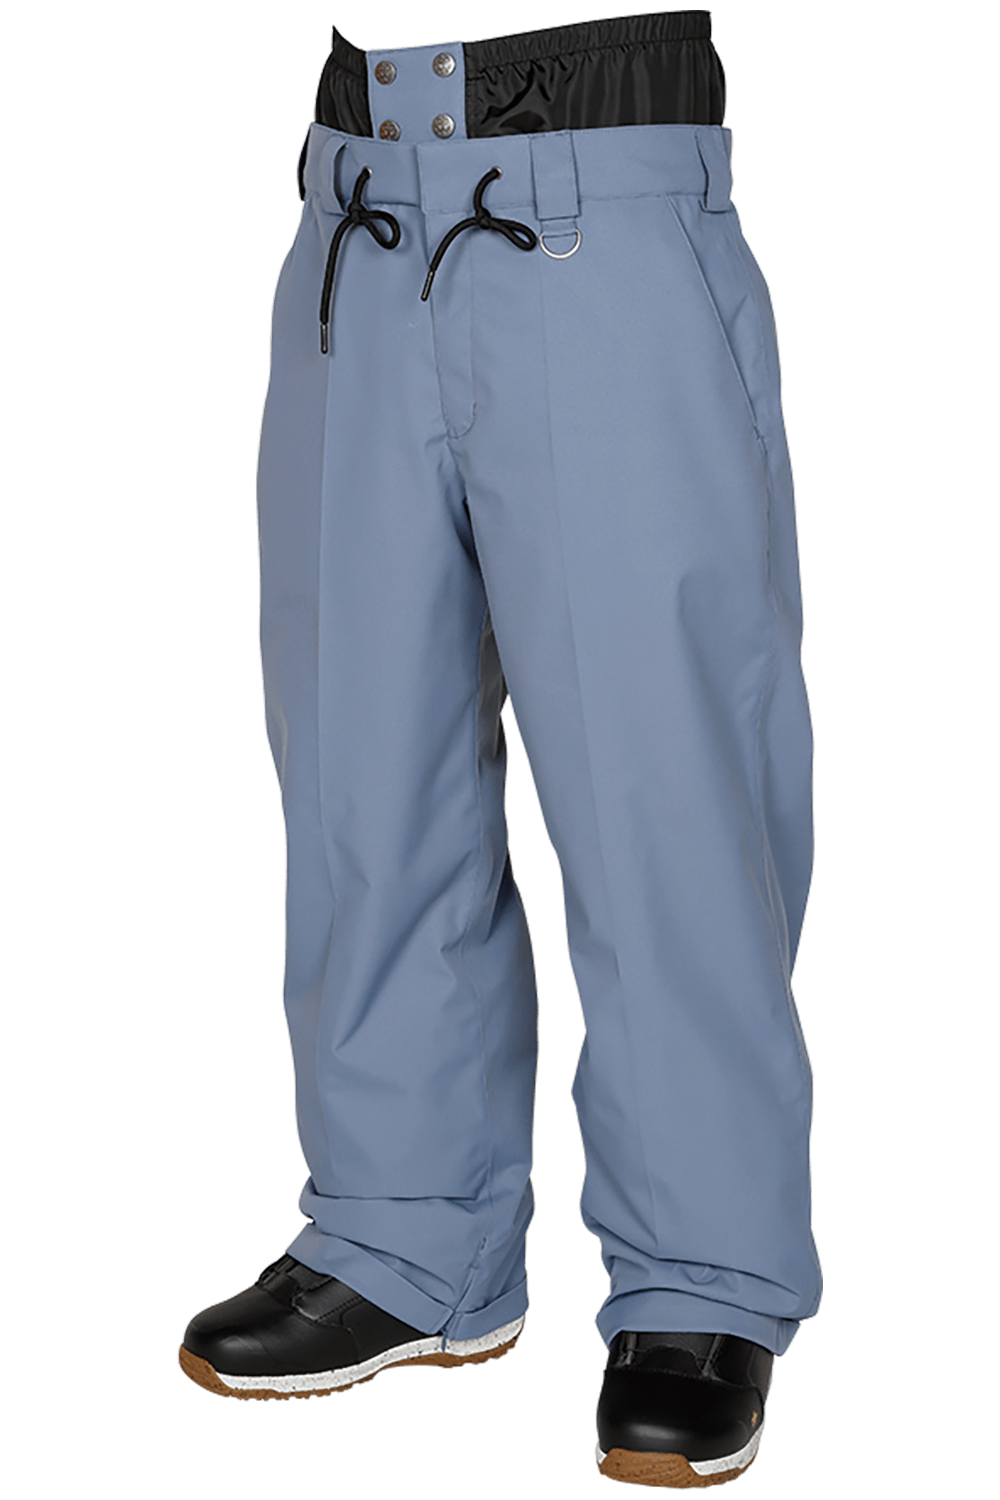 WORK PANTS | Scape Outerwear